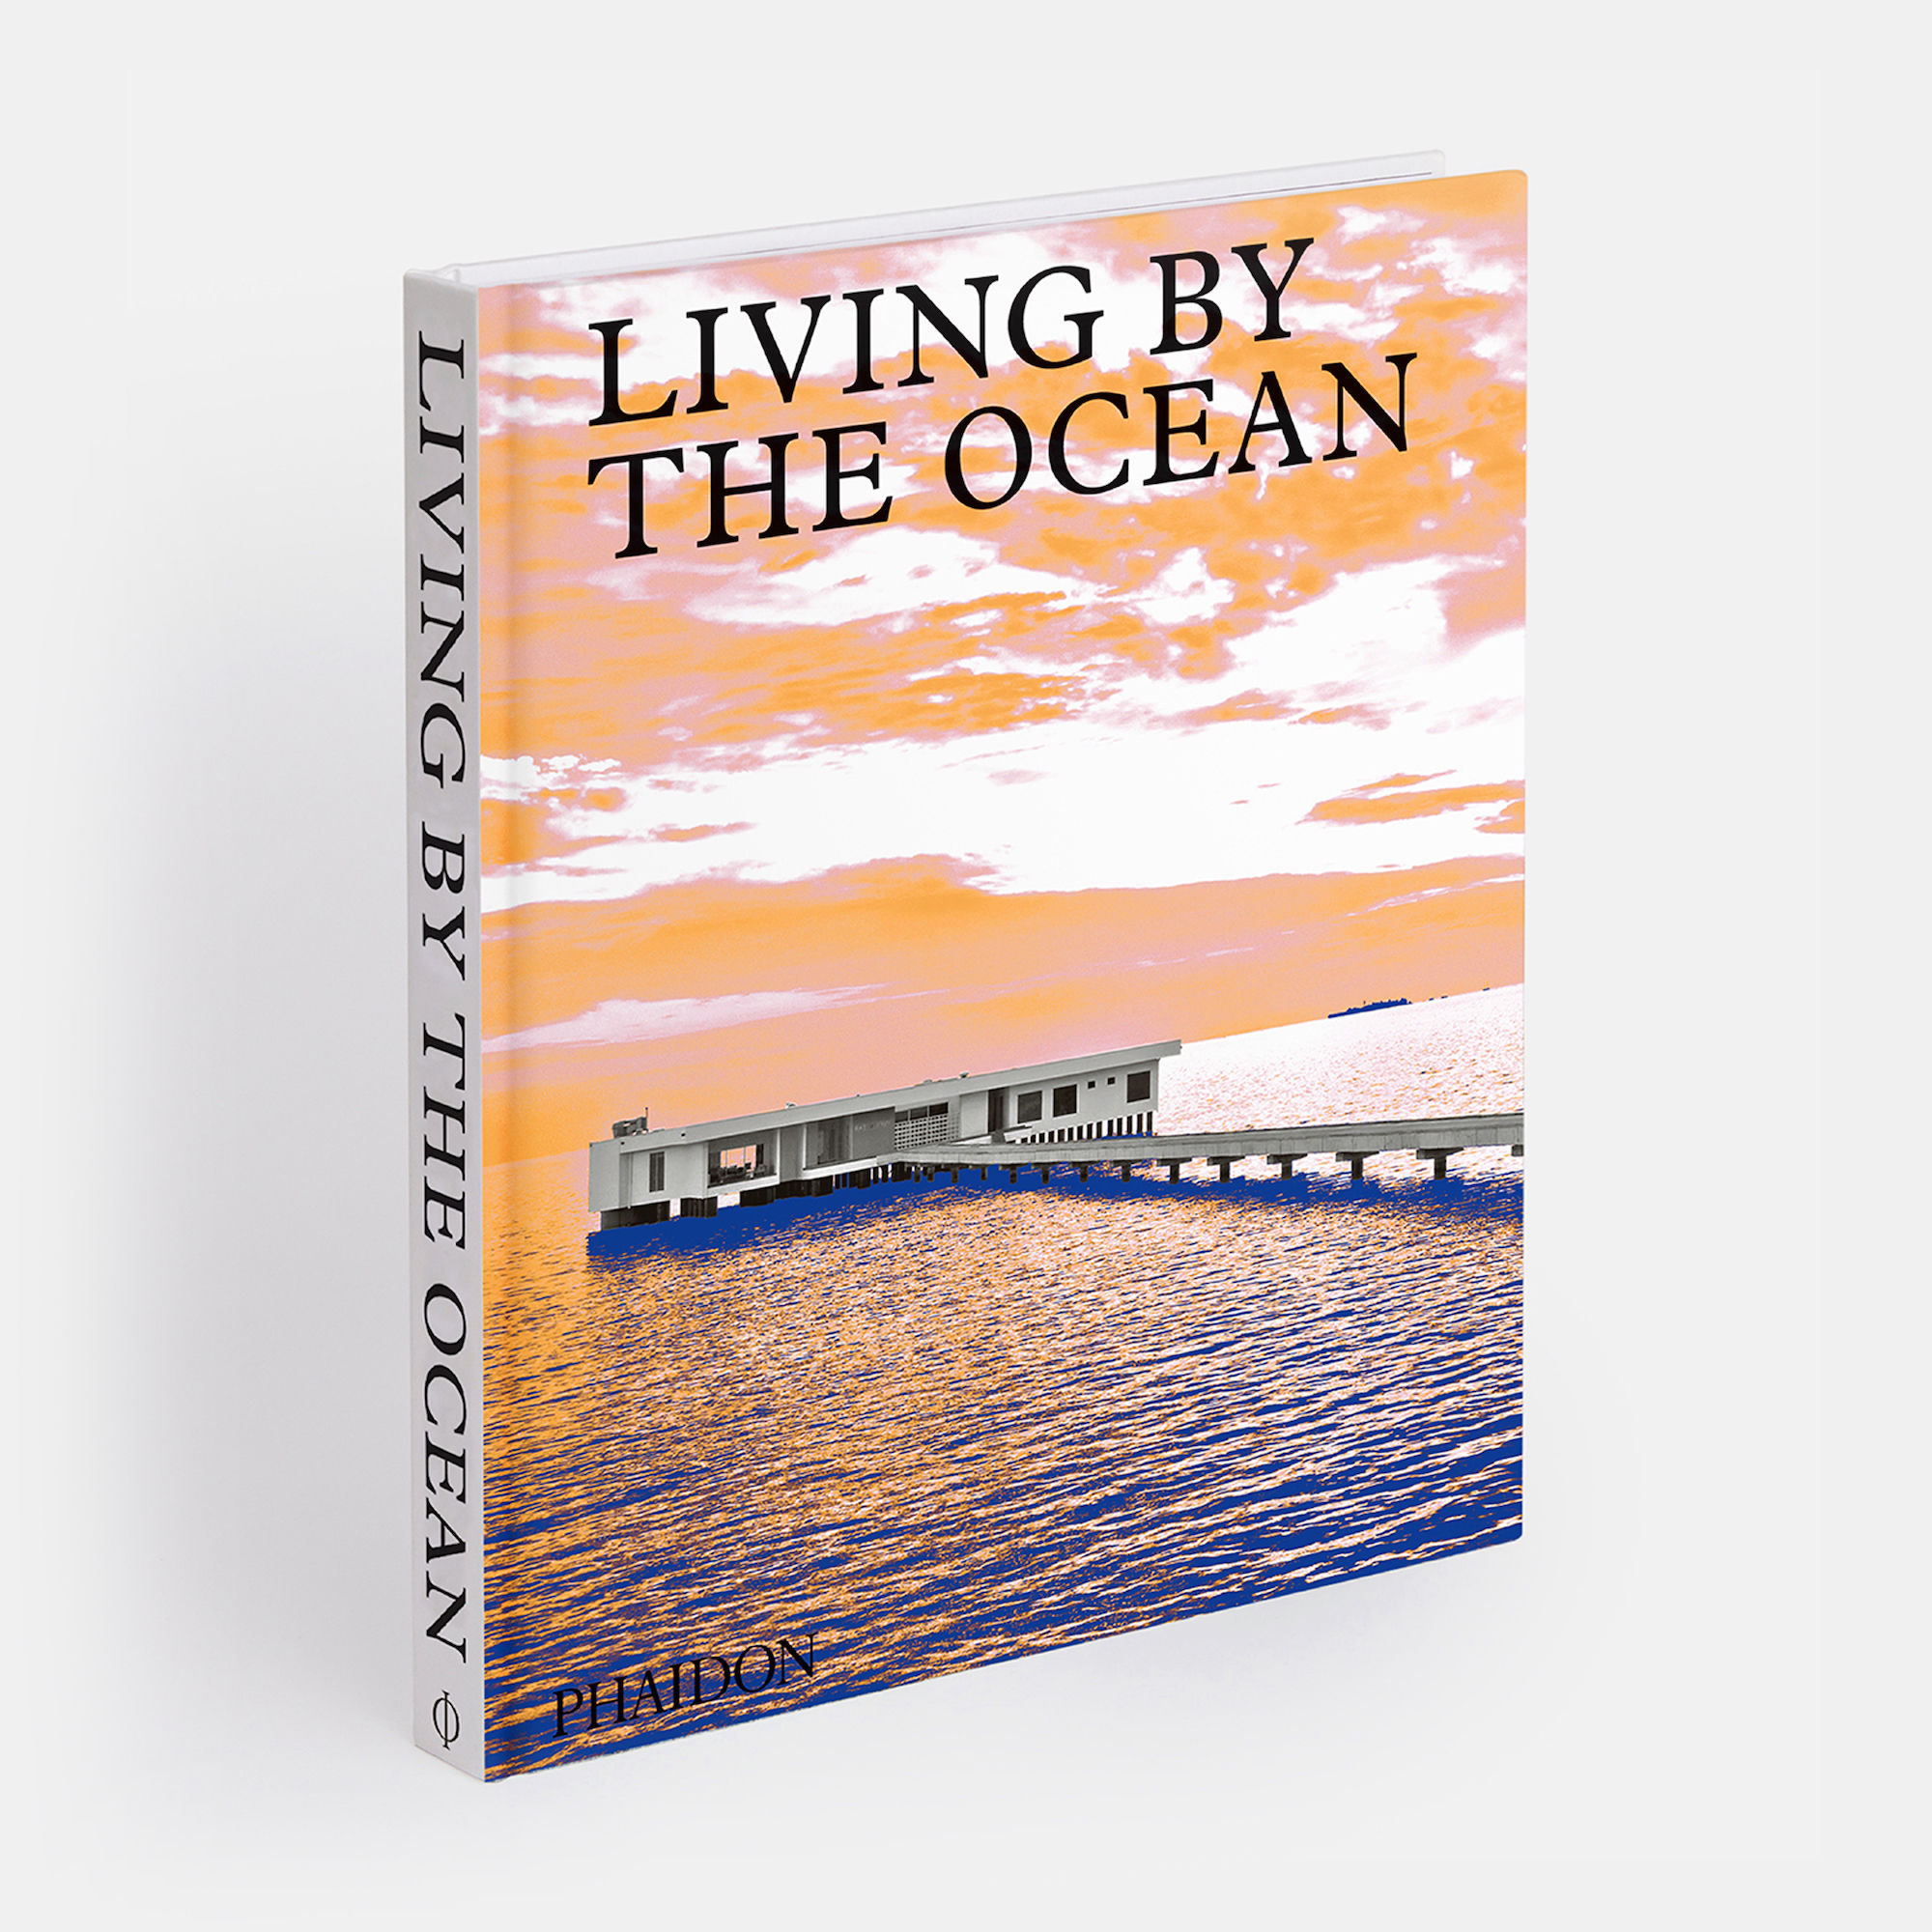 All you need to know about Living by the Ocean